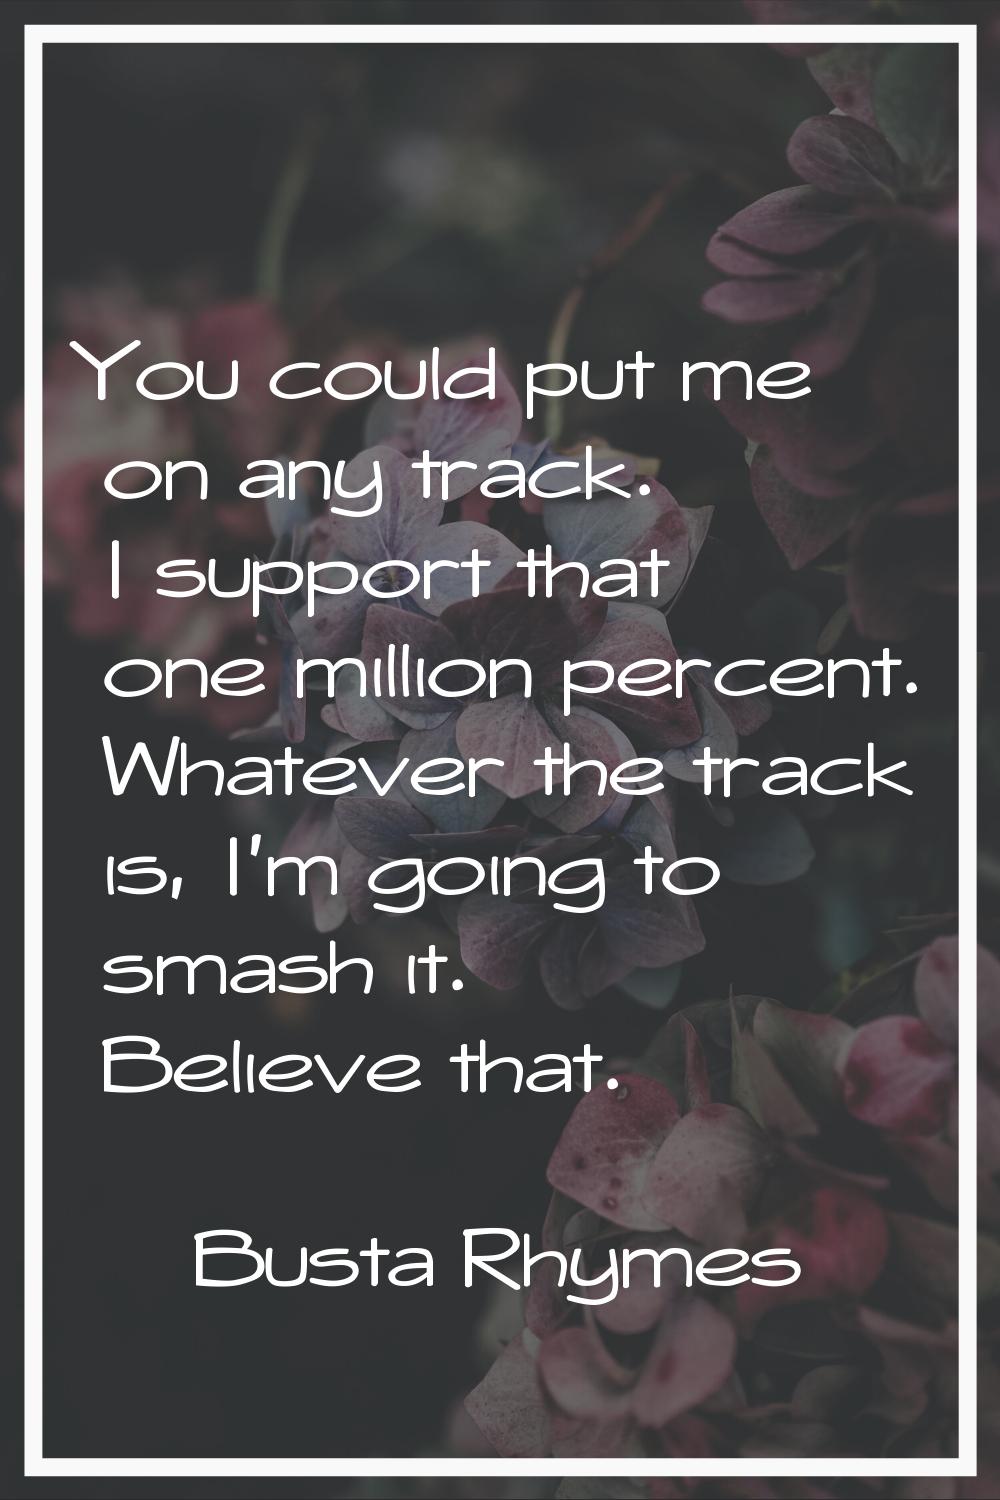 You could put me on any track. I support that one million percent. Whatever the track is, I'm going